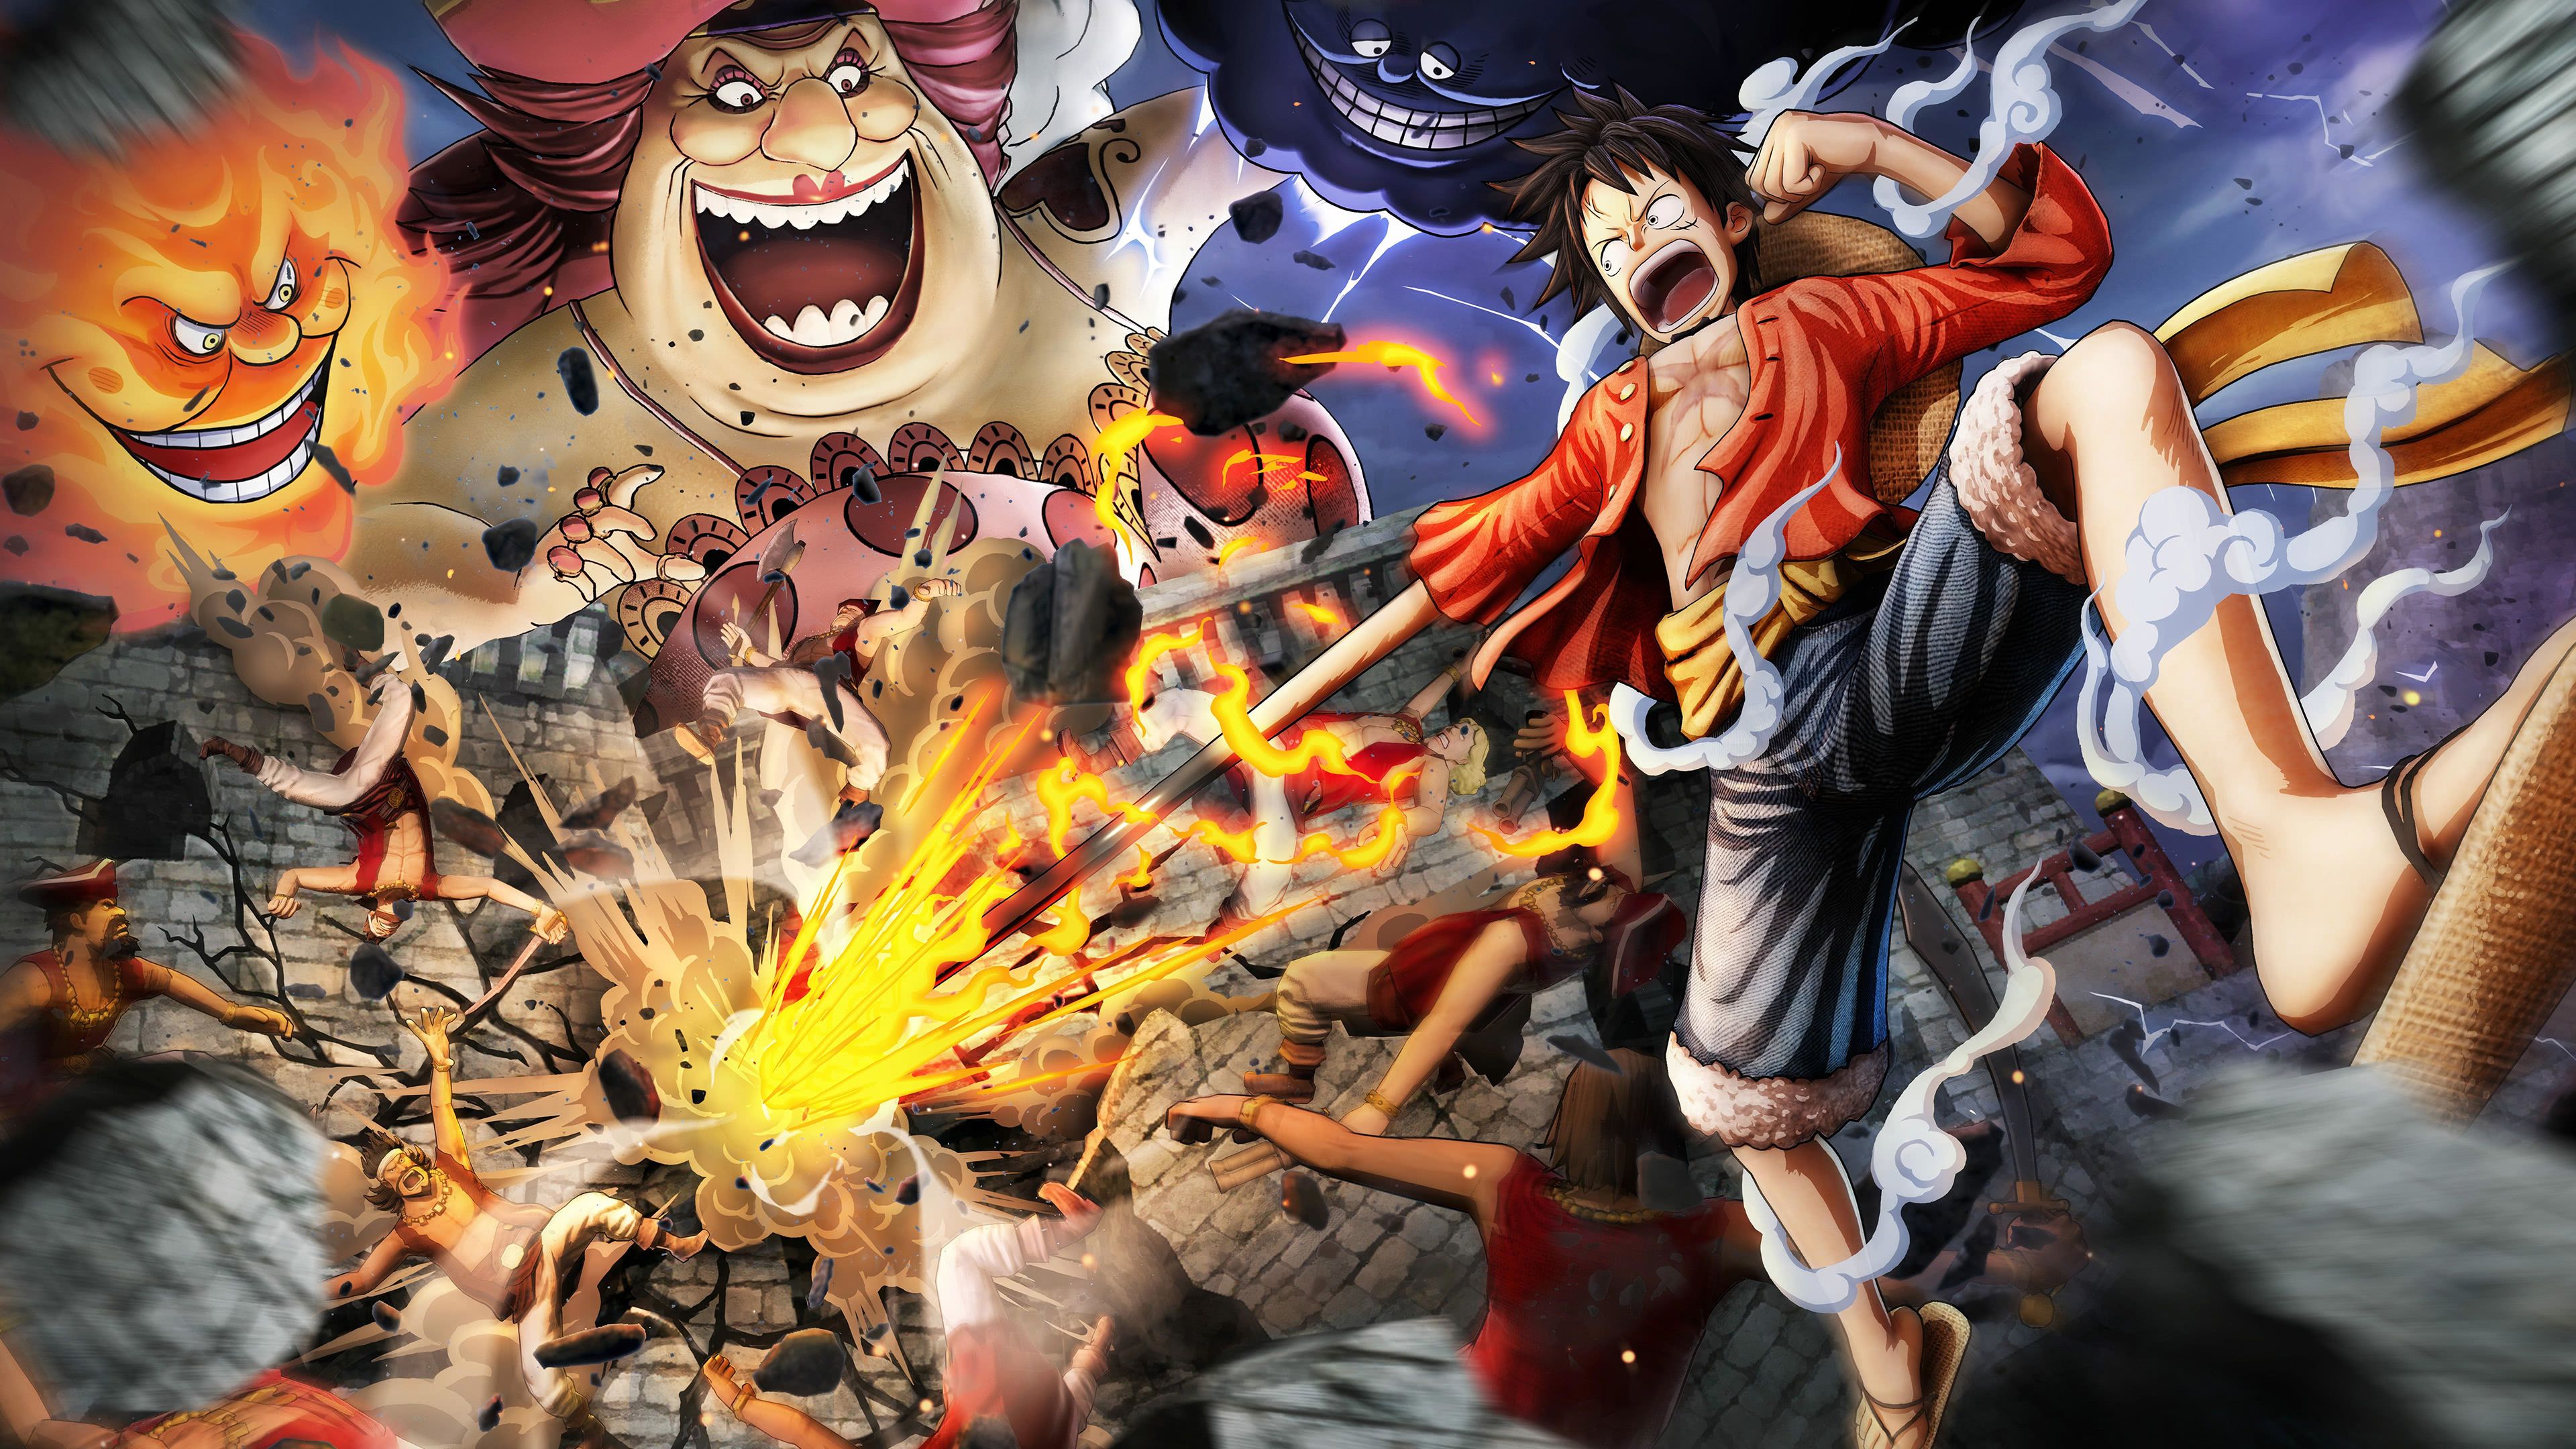 Anime One Piece 4k Ultra HD Wallpaper by SantiagoMarinG